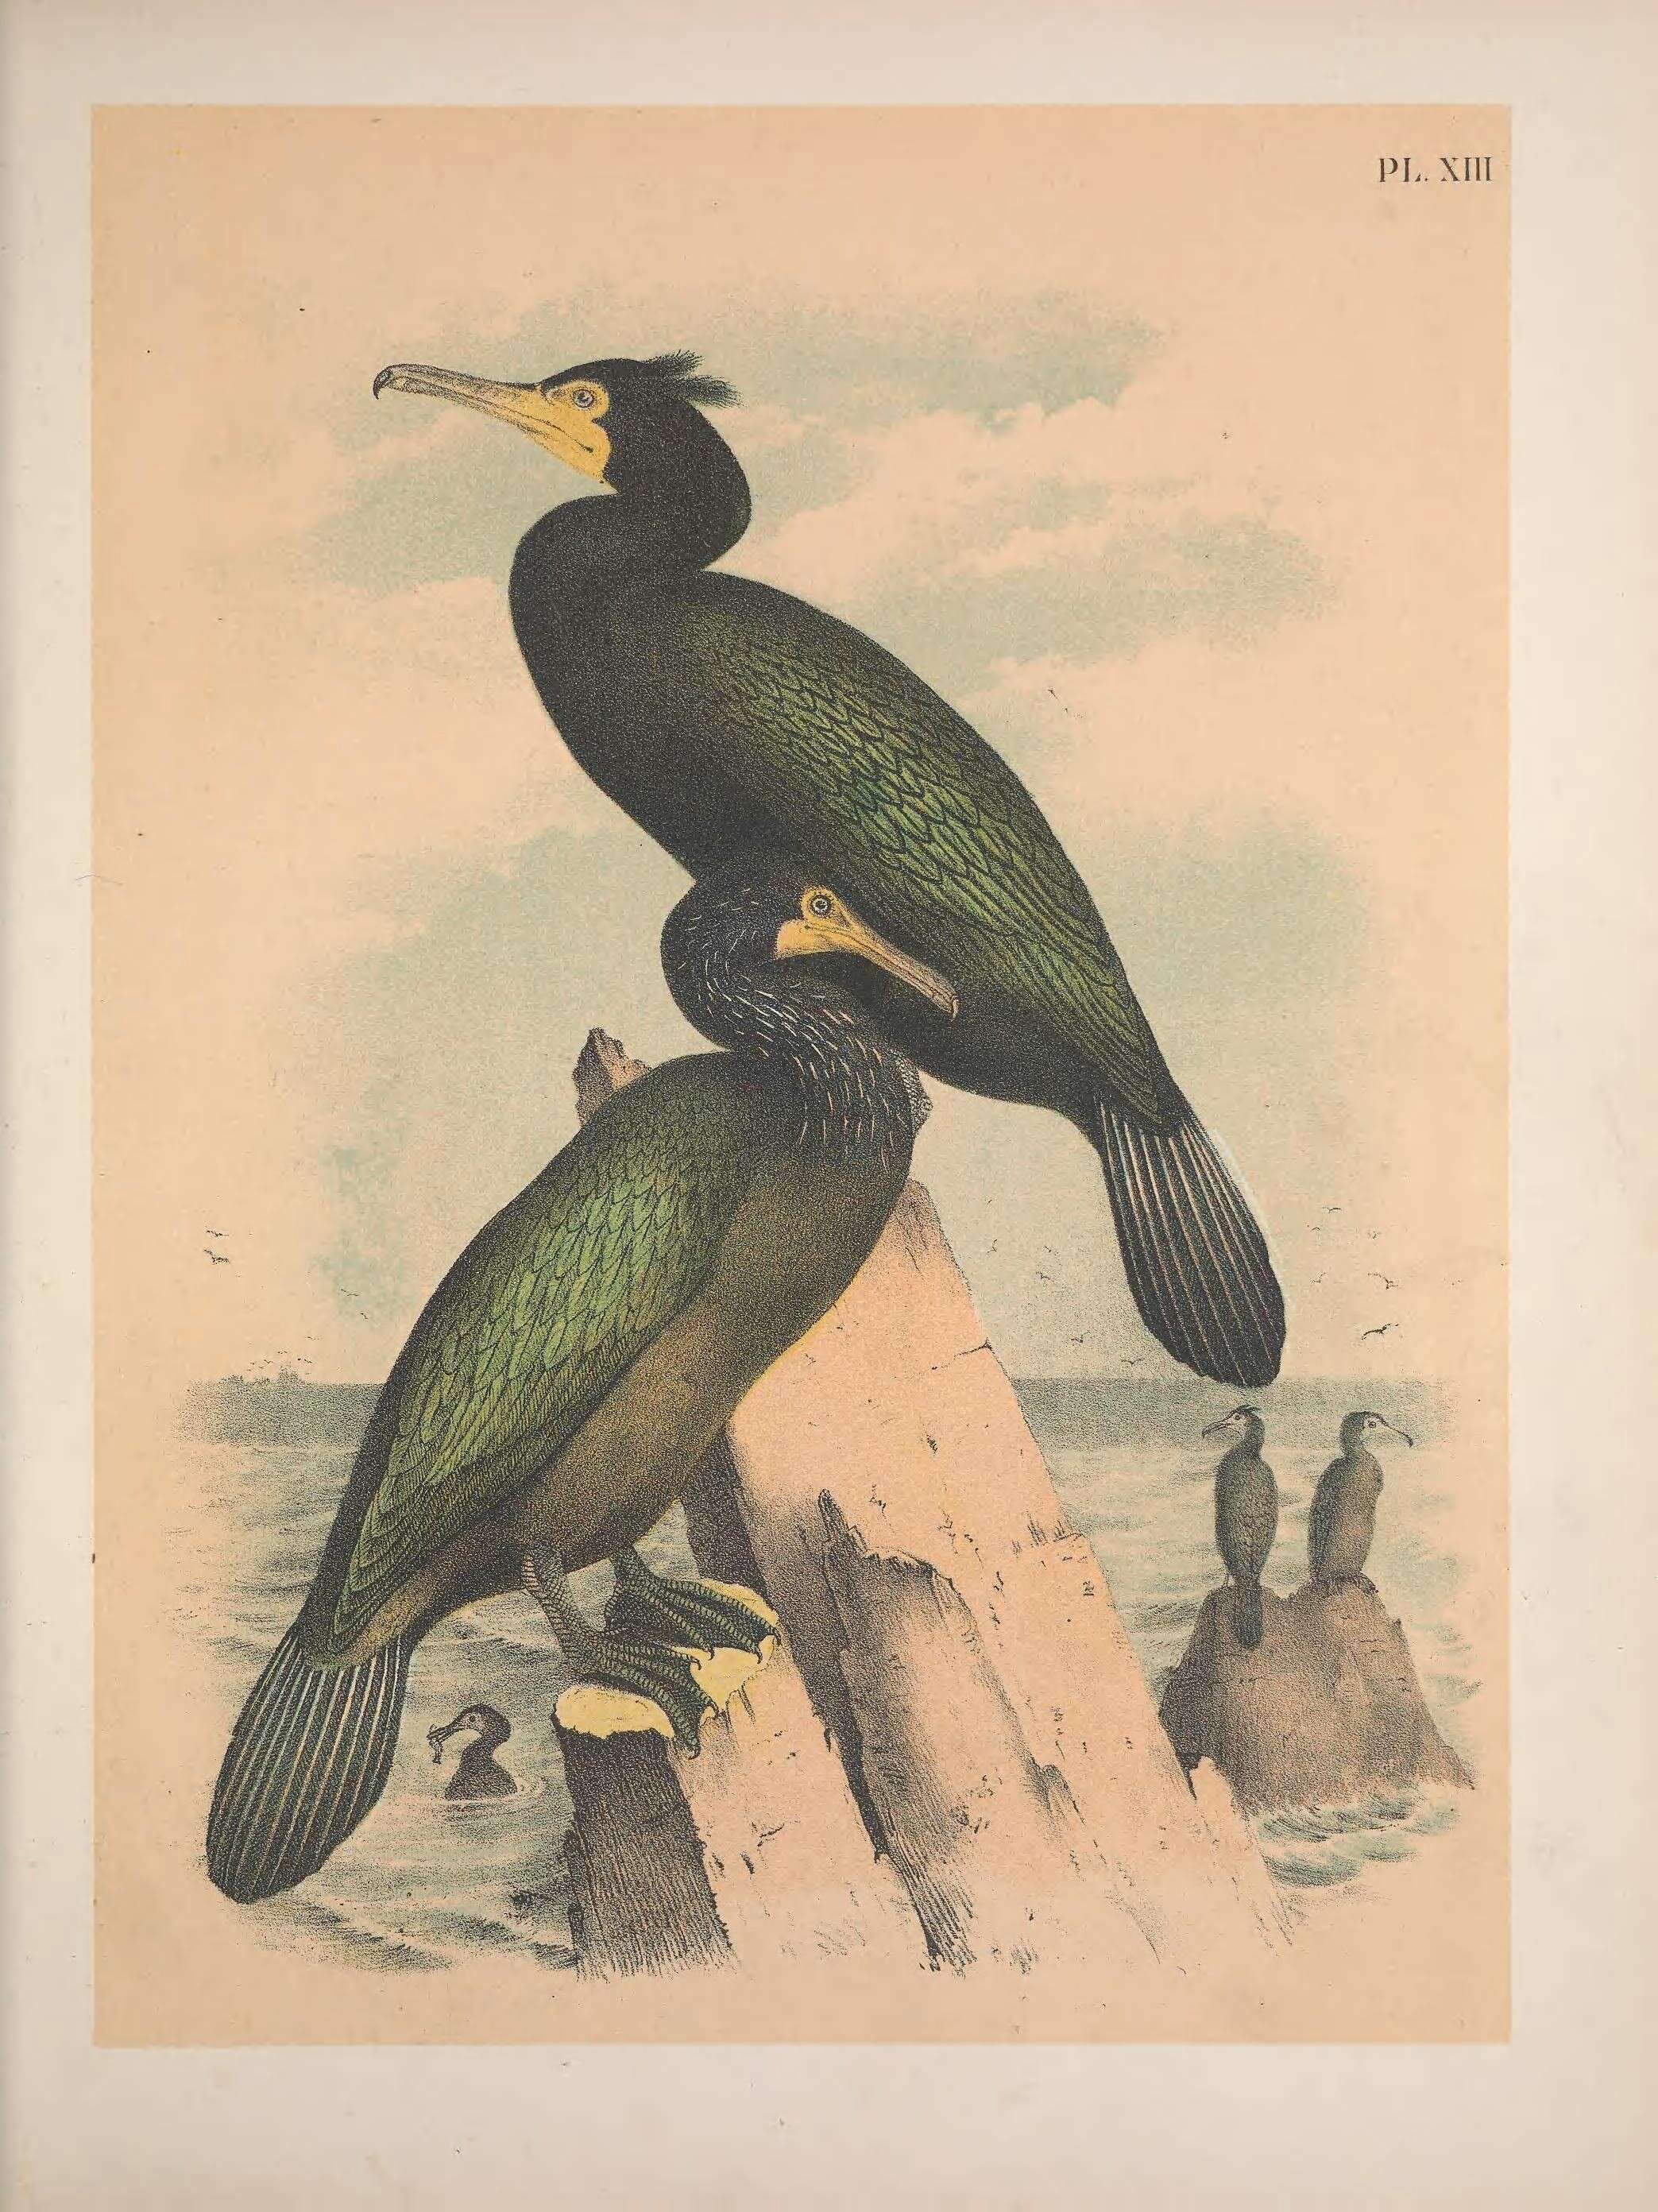 Image of Double-crested Cormorant